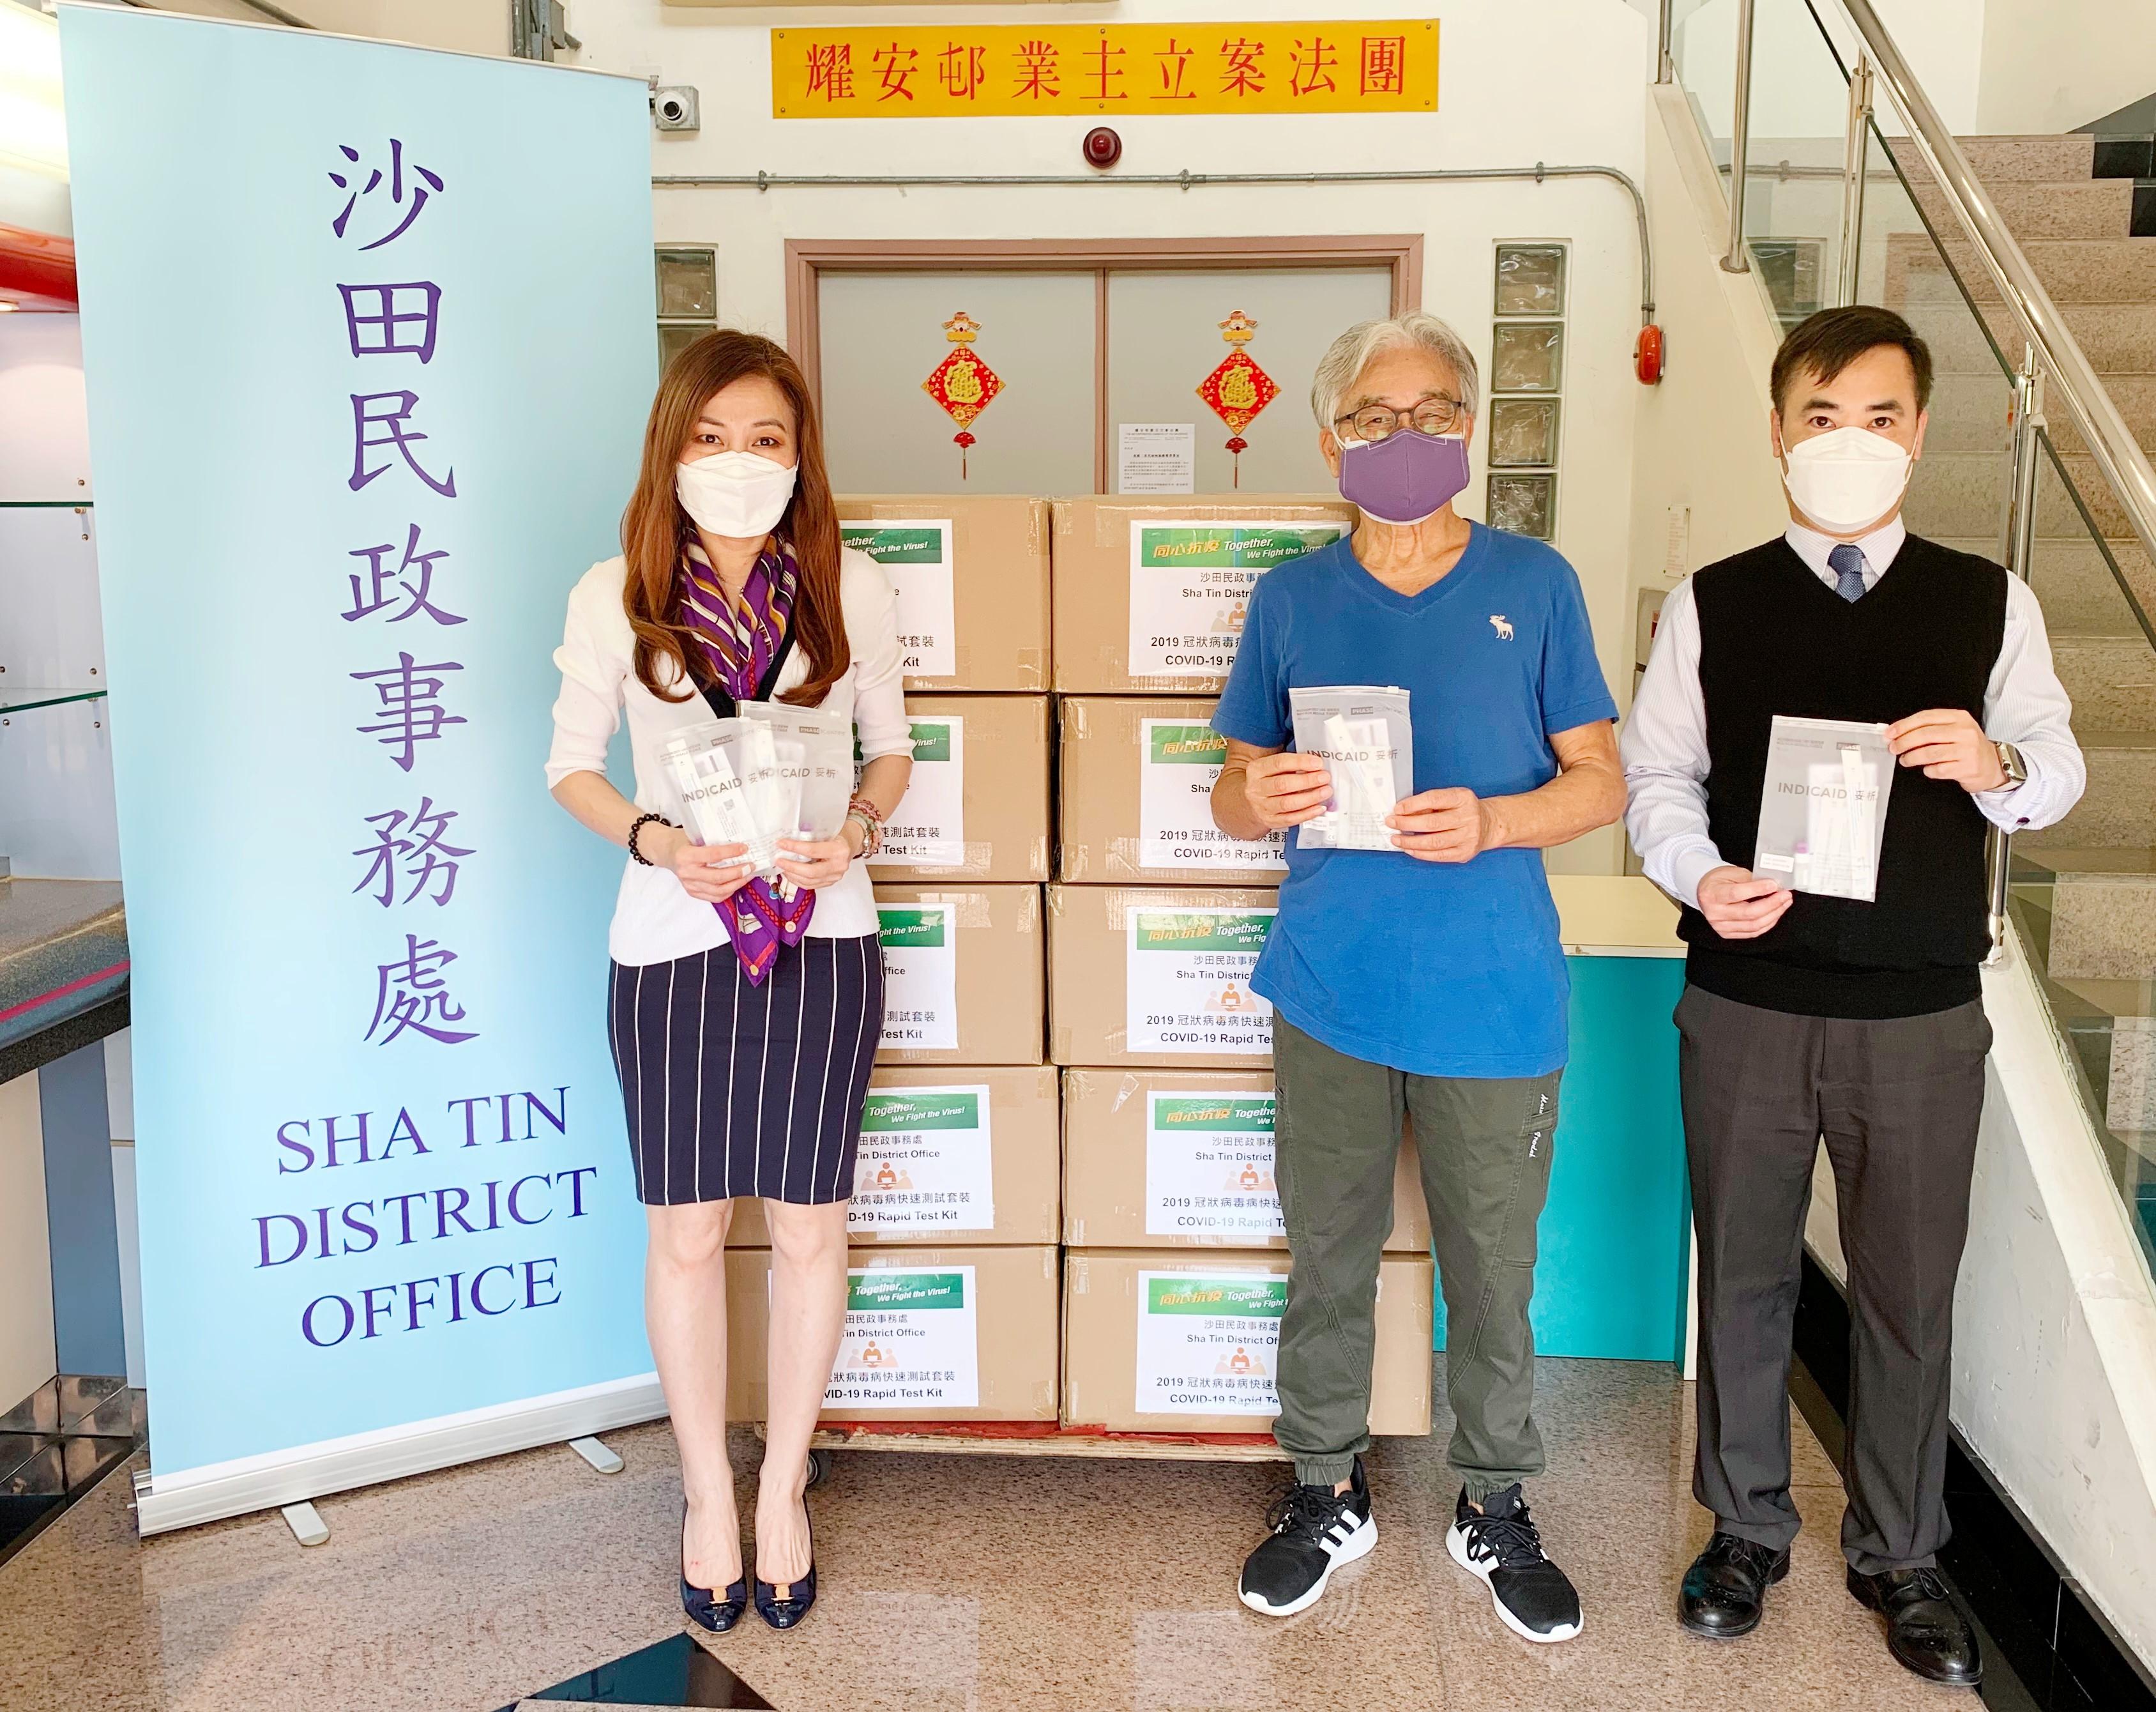 The Sha Tin District Office today (March 14) distributed COVID-19 rapid test kits to households, cleansing workers and property management staff living and working in Yiu On Estate for voluntary testing through the owners' corporation and the property management company.